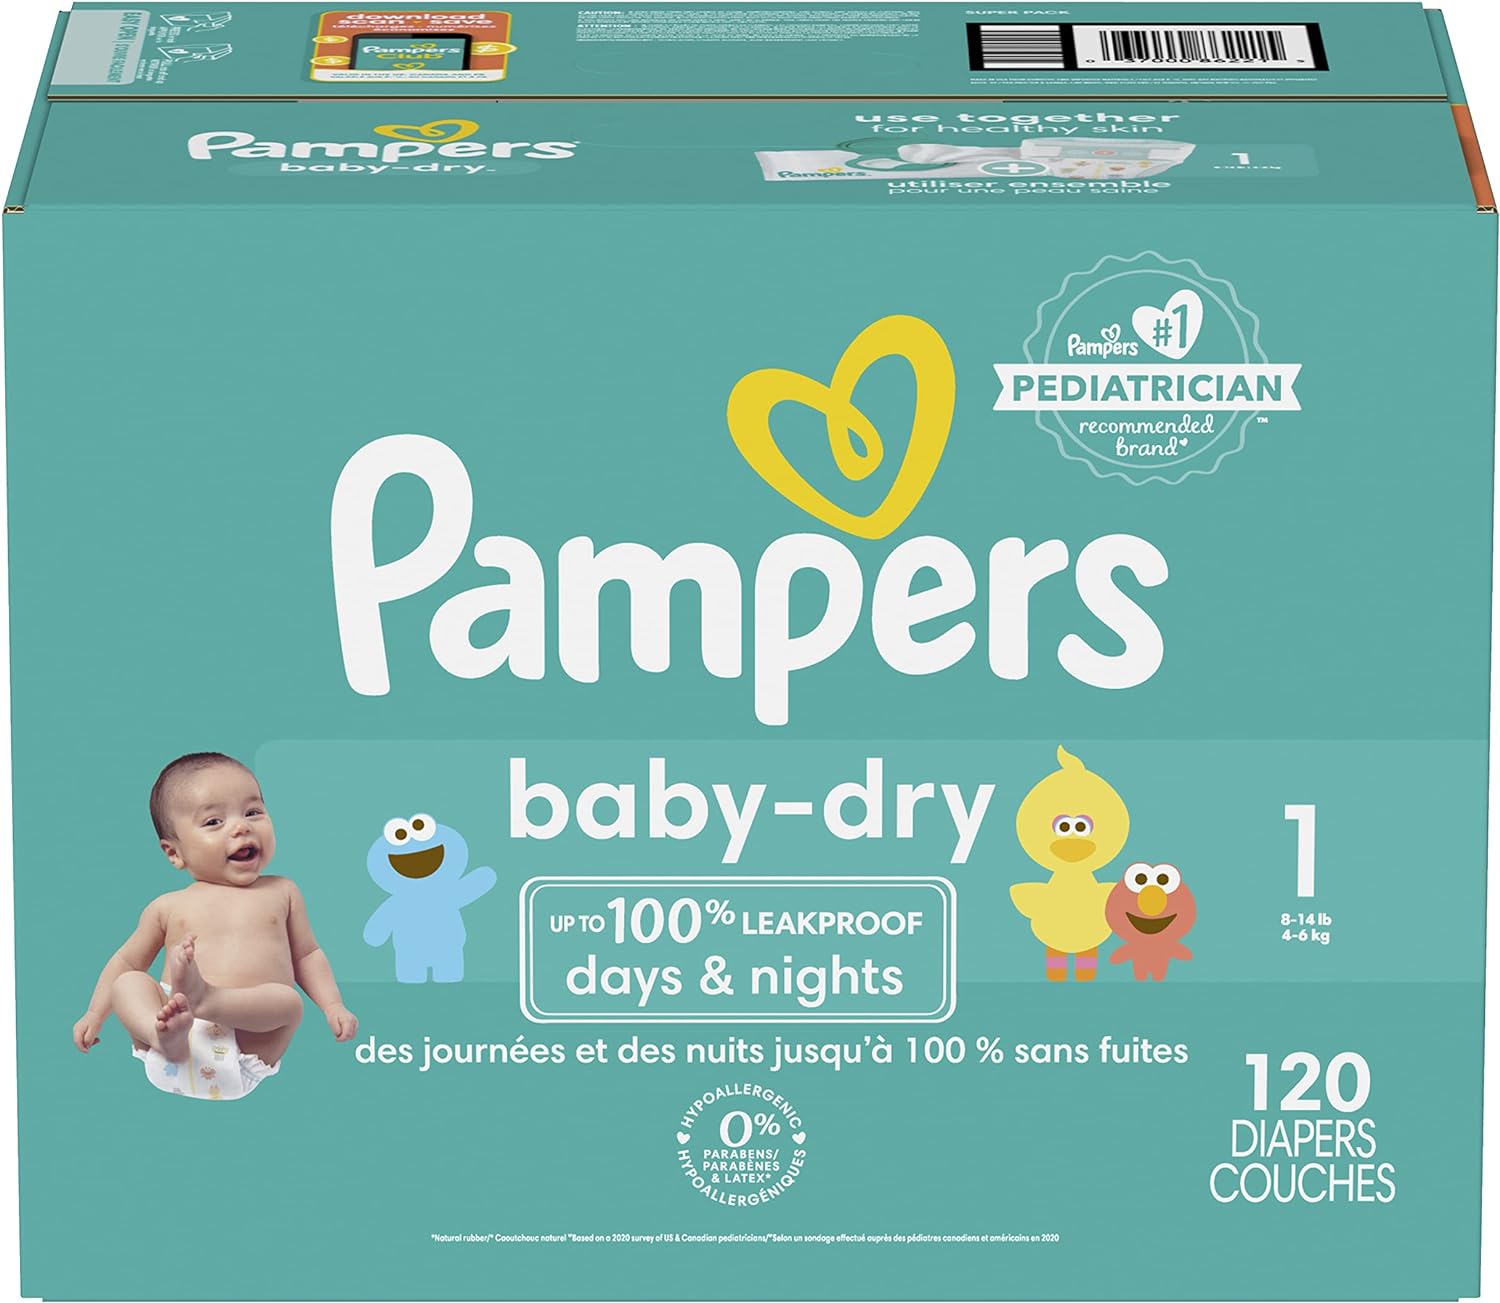 rossnę pampers